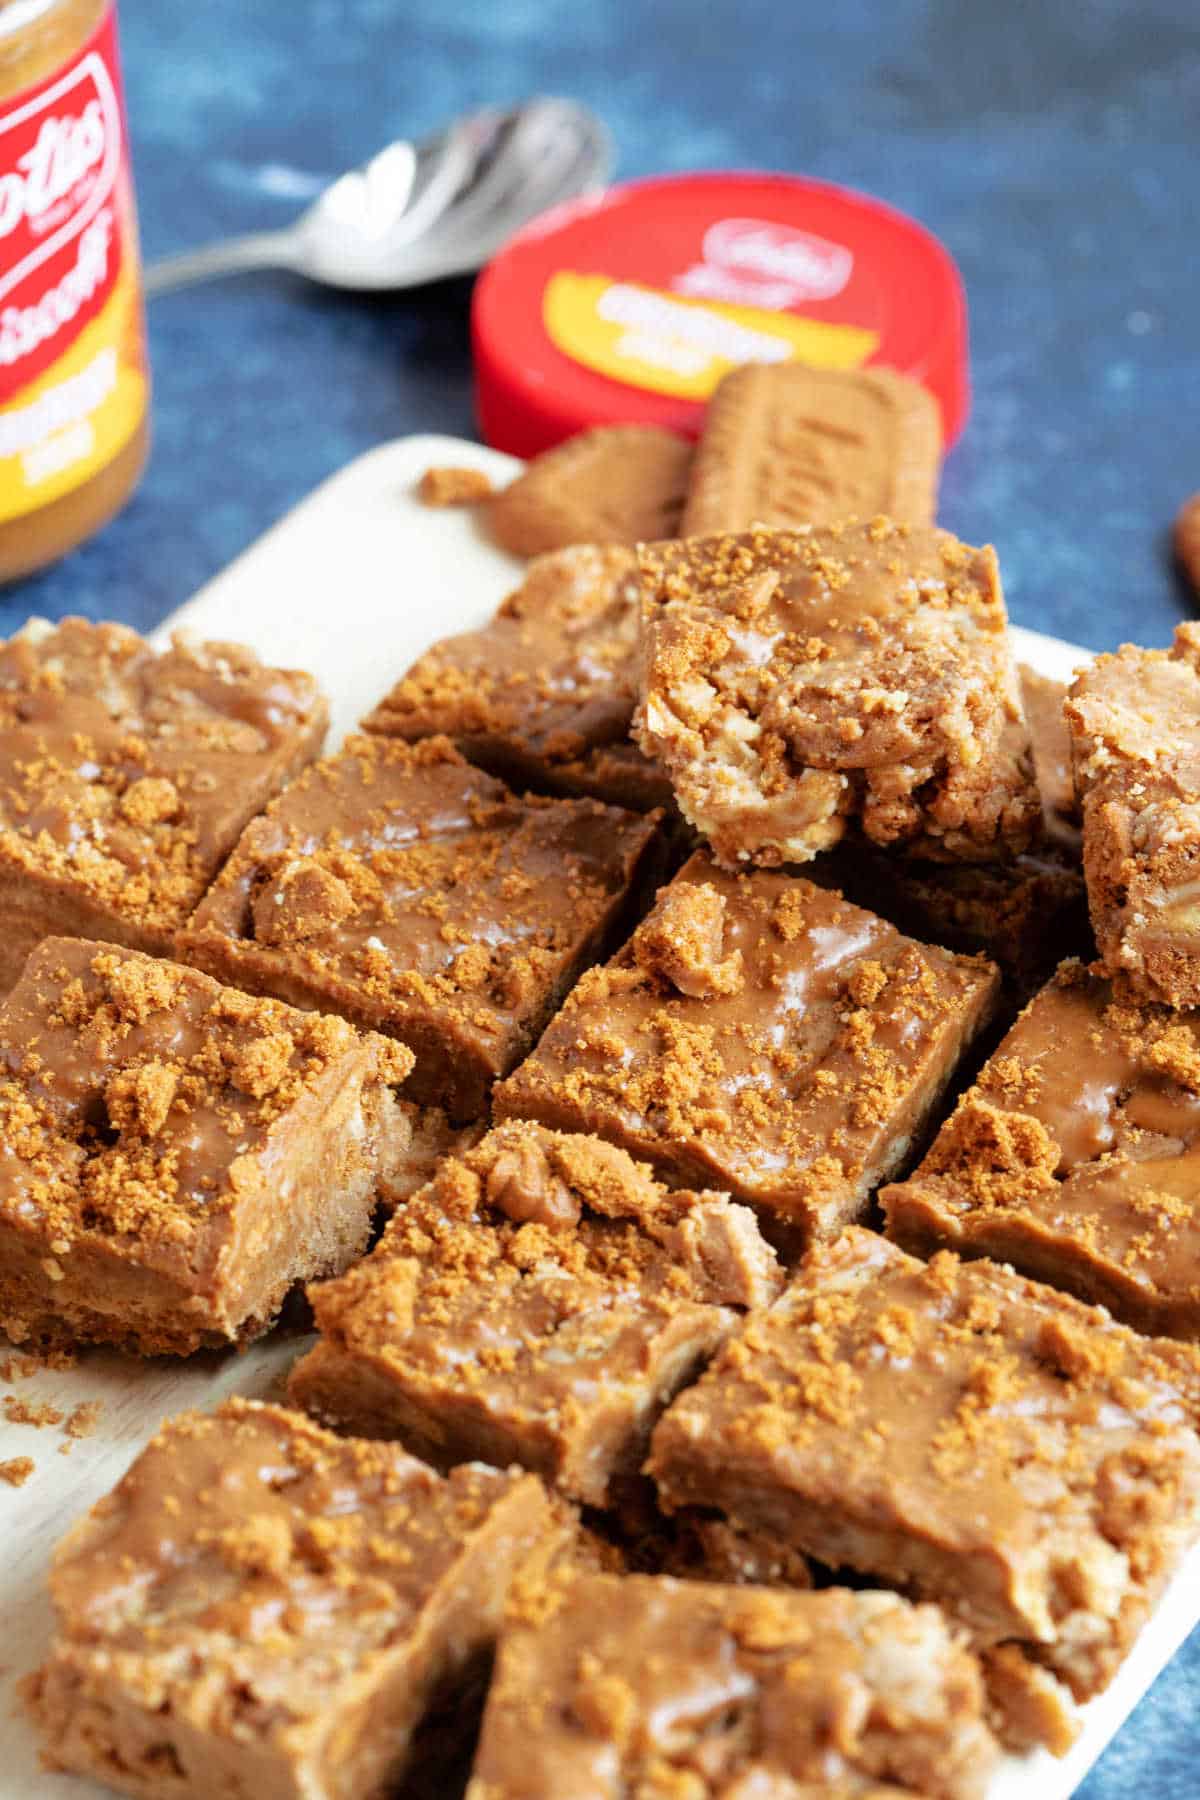 Biscoff tiffin bars with a jar of Biscoff spread in the background.